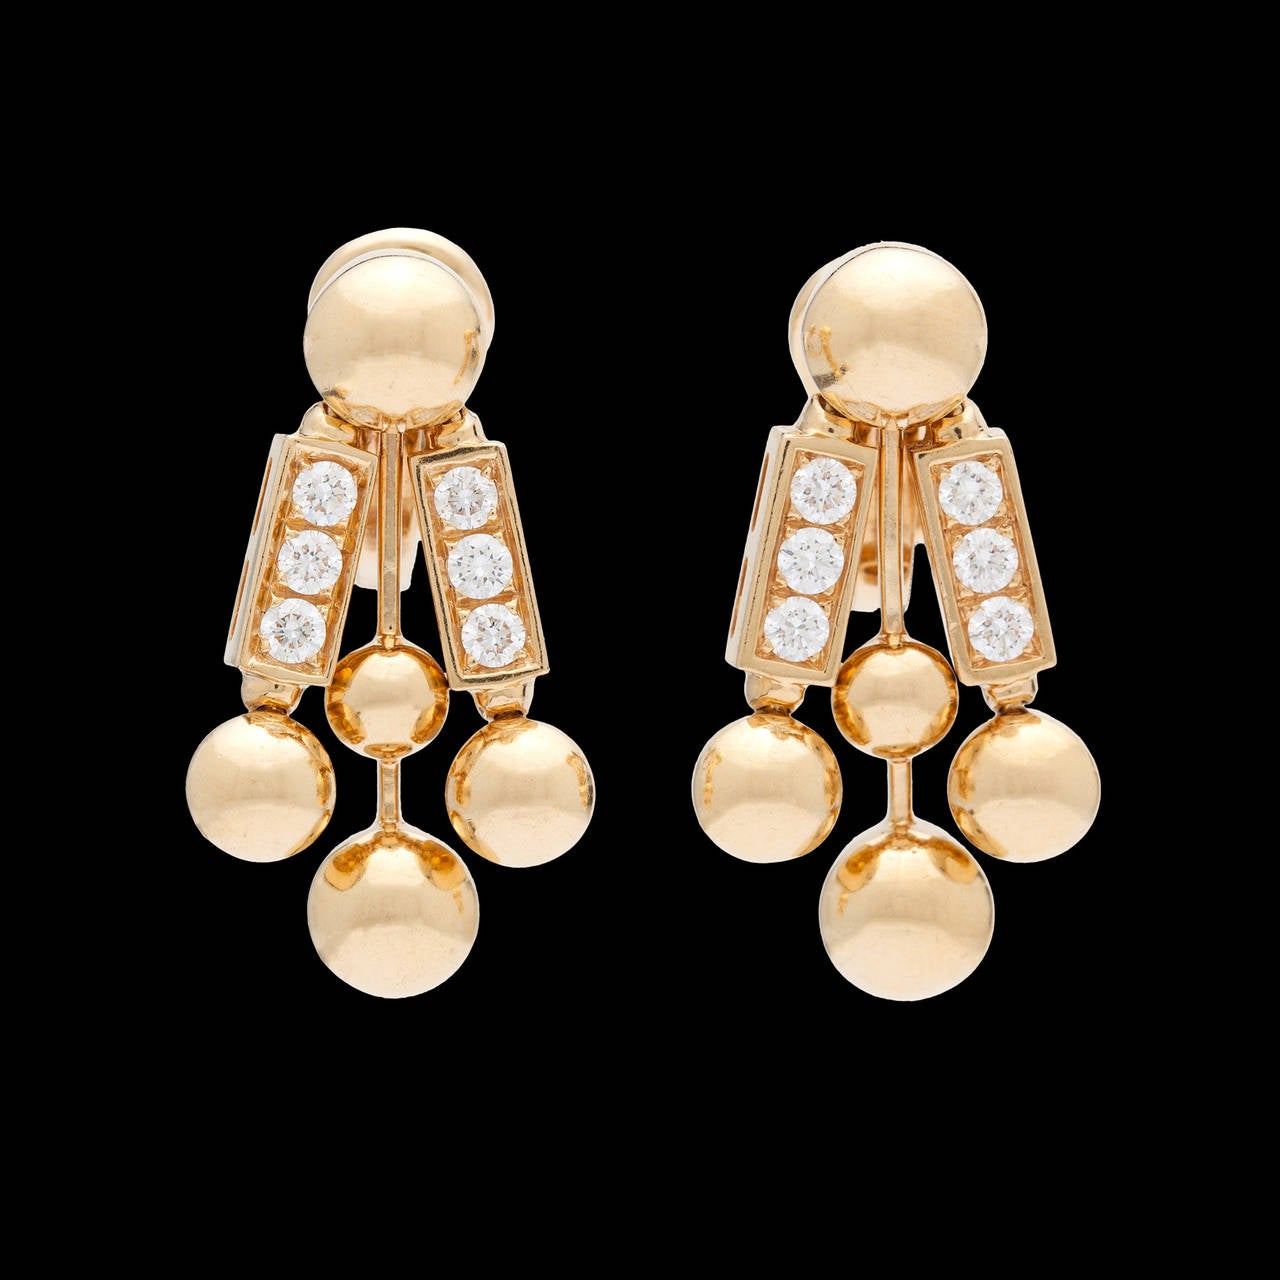 A Fantastic Pair of Bulgari Earrings in 18Kt Yellow Gold with 12 Round Brilliant Cut Fine Diamonds Totaling 0.60 Carat. The earrings measure approximately 1 inch long and weigh 19.3 grams together.